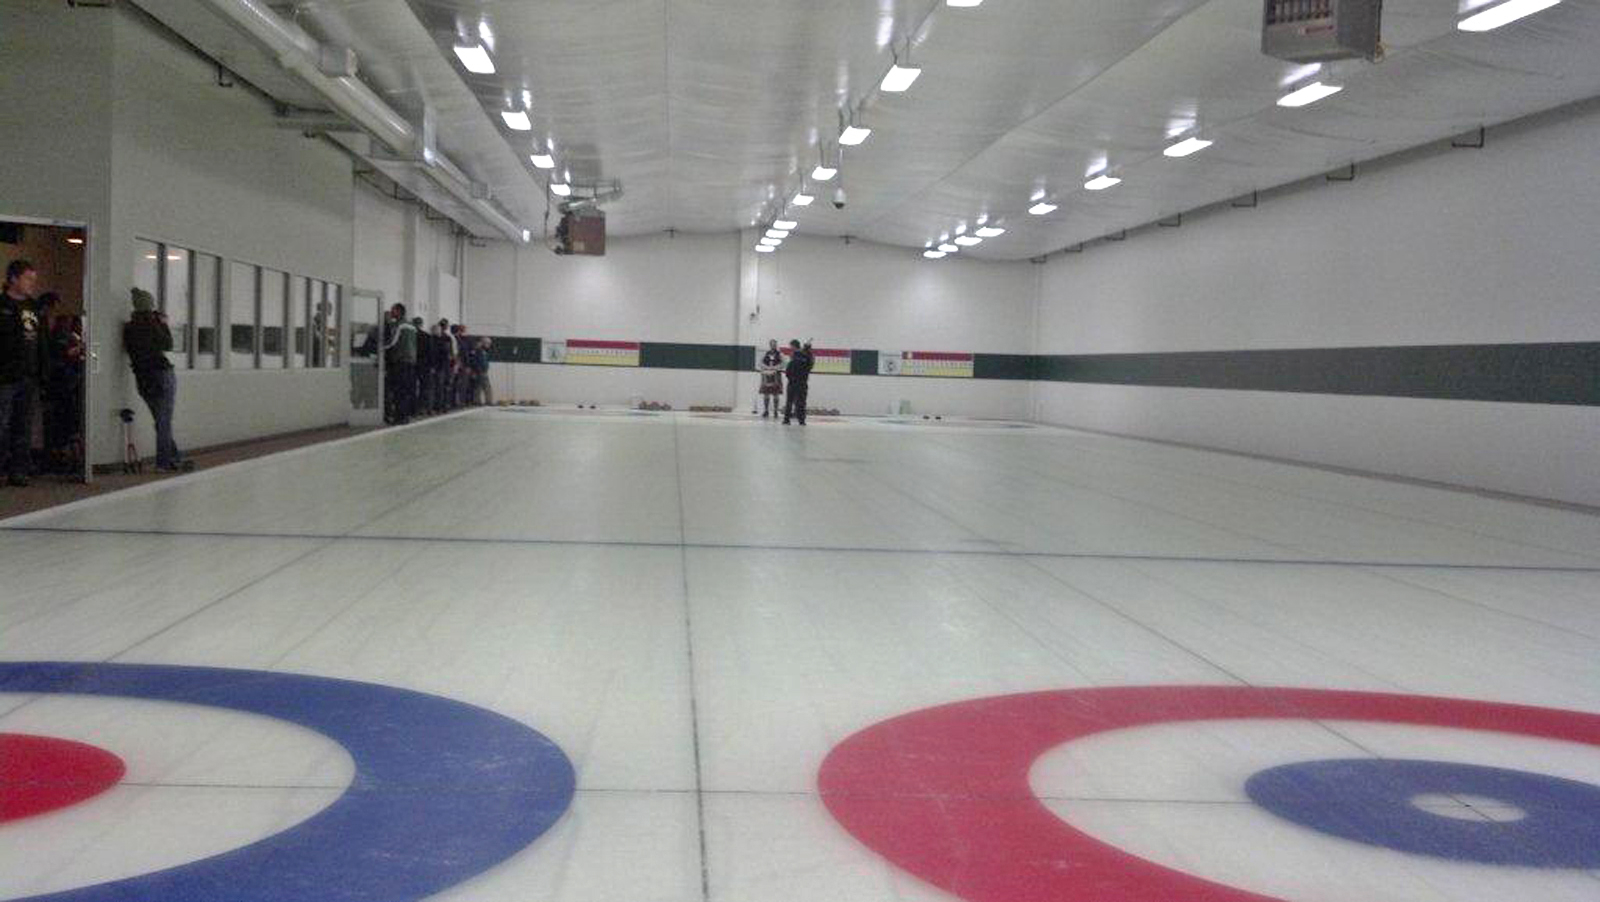 The Evergreen Curling Club, which had its first home in Vancouver, has opened a new facility in Beaverton.